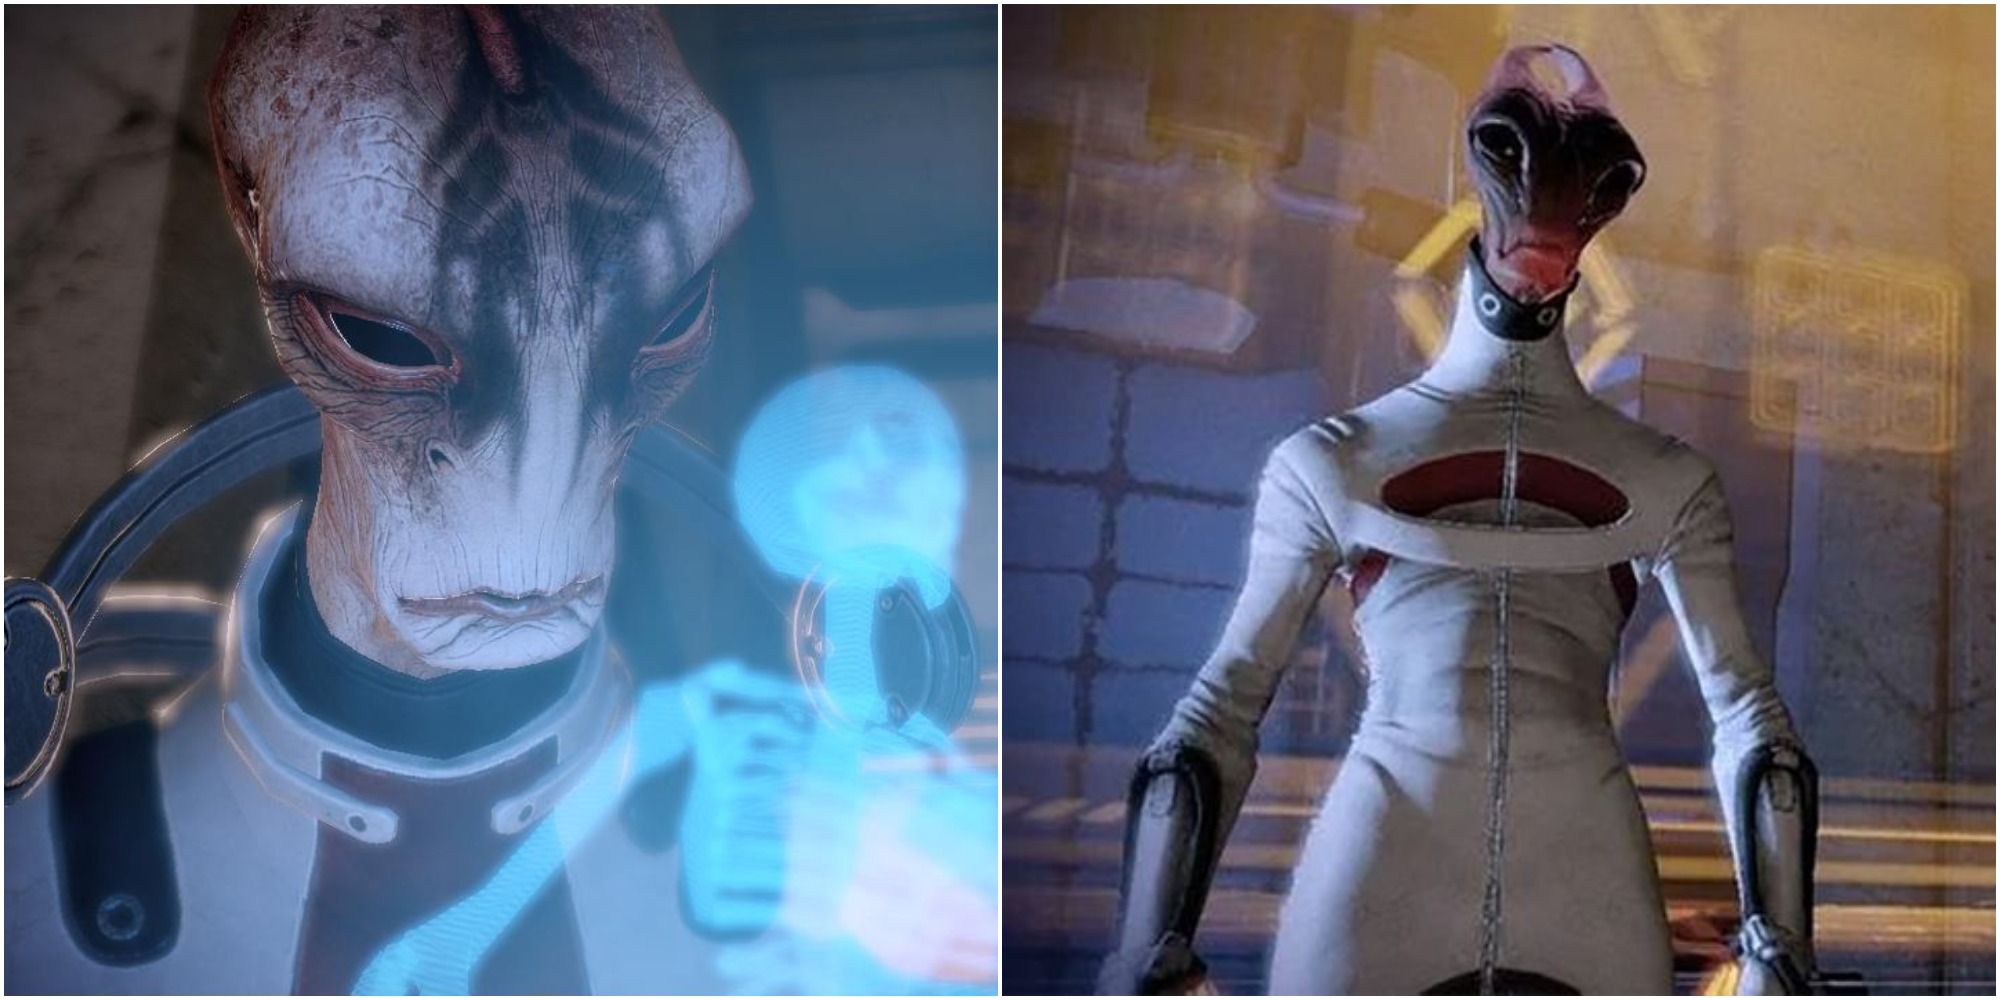 Should You Destroy Or Save The Genopage Data In Mass Effect 2?